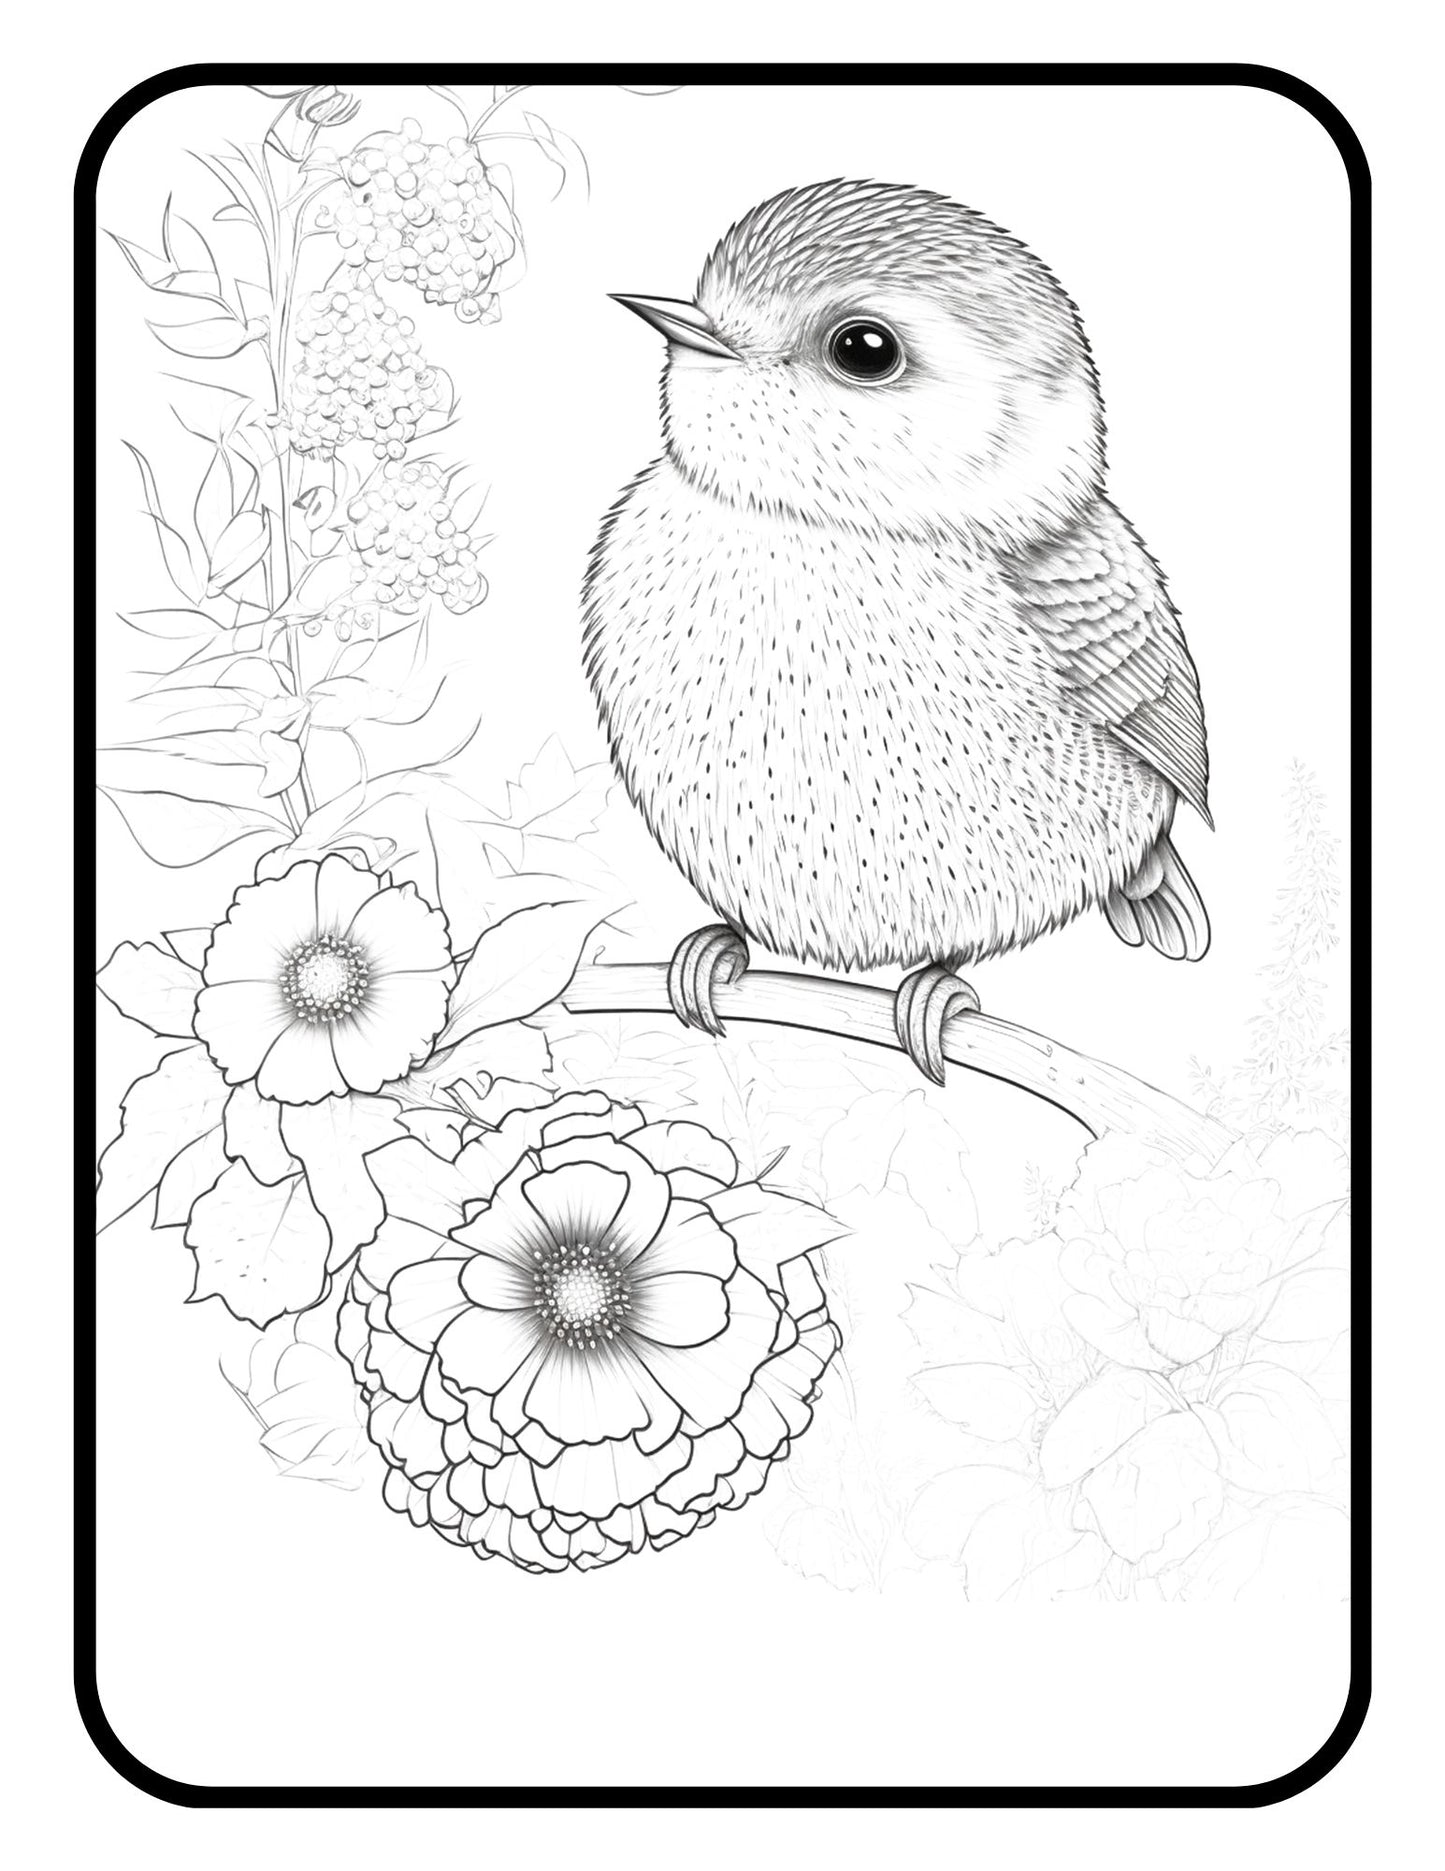 Bird Animal Coloring Books For Kids And Adults Stress Relief Gift Activity Book Bird Lovers Gift Idea Coloring Book Gift Birds Coloring Book